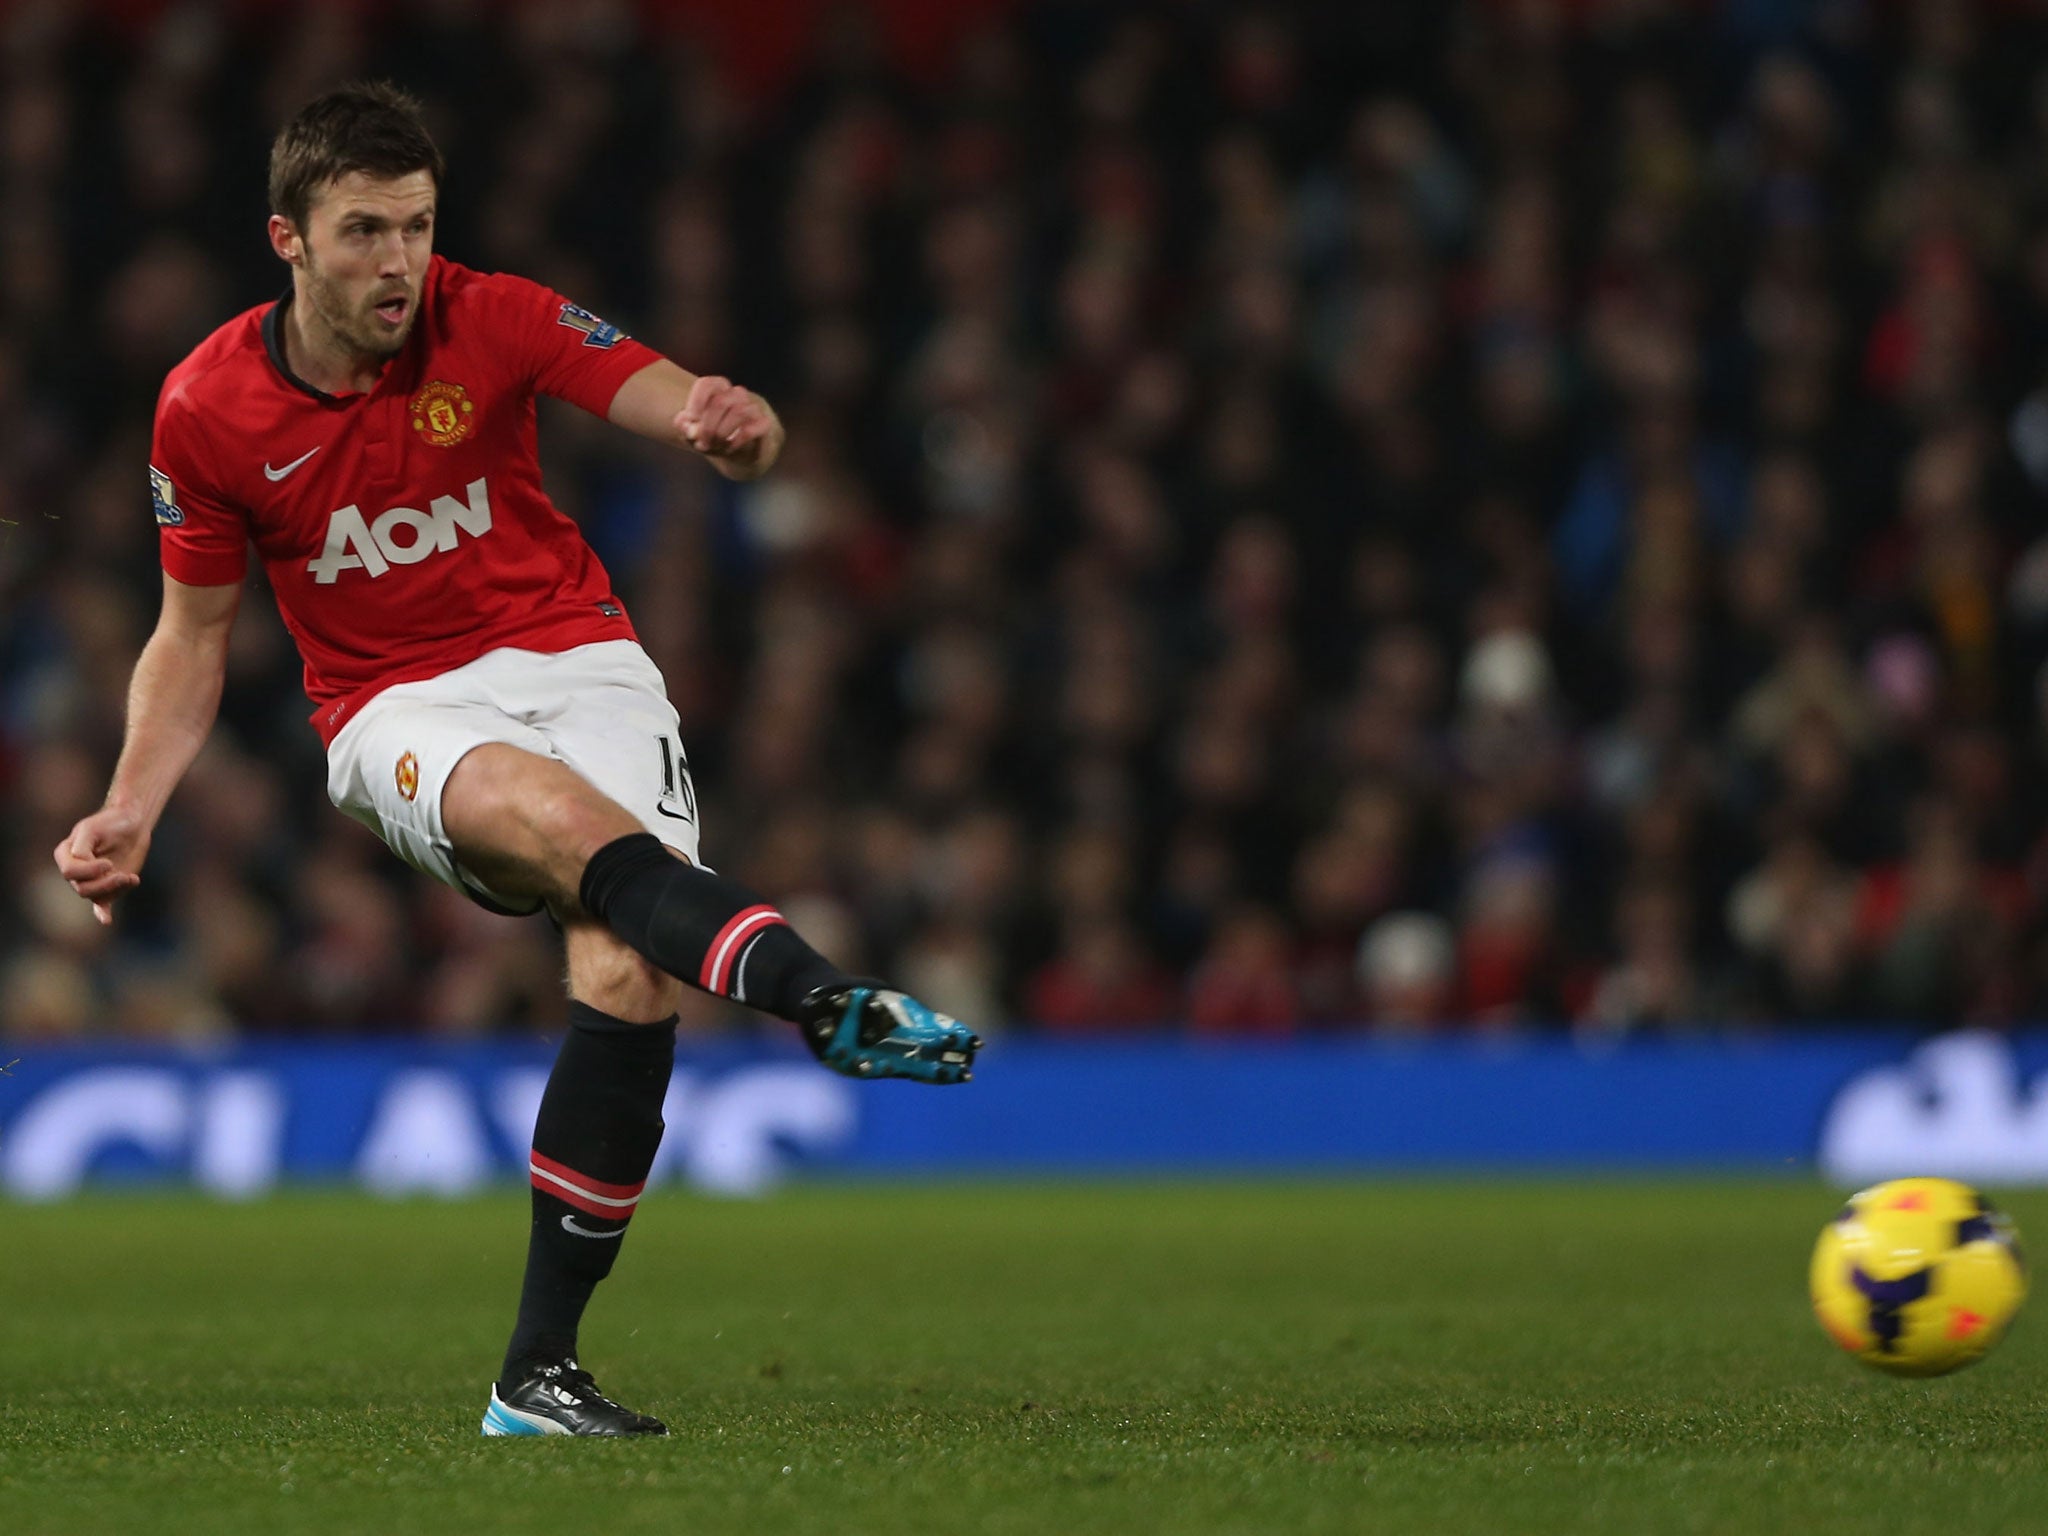 Michael Carrick wants to repay the Manchester United fans for their support with a League Cup win over Sunderland